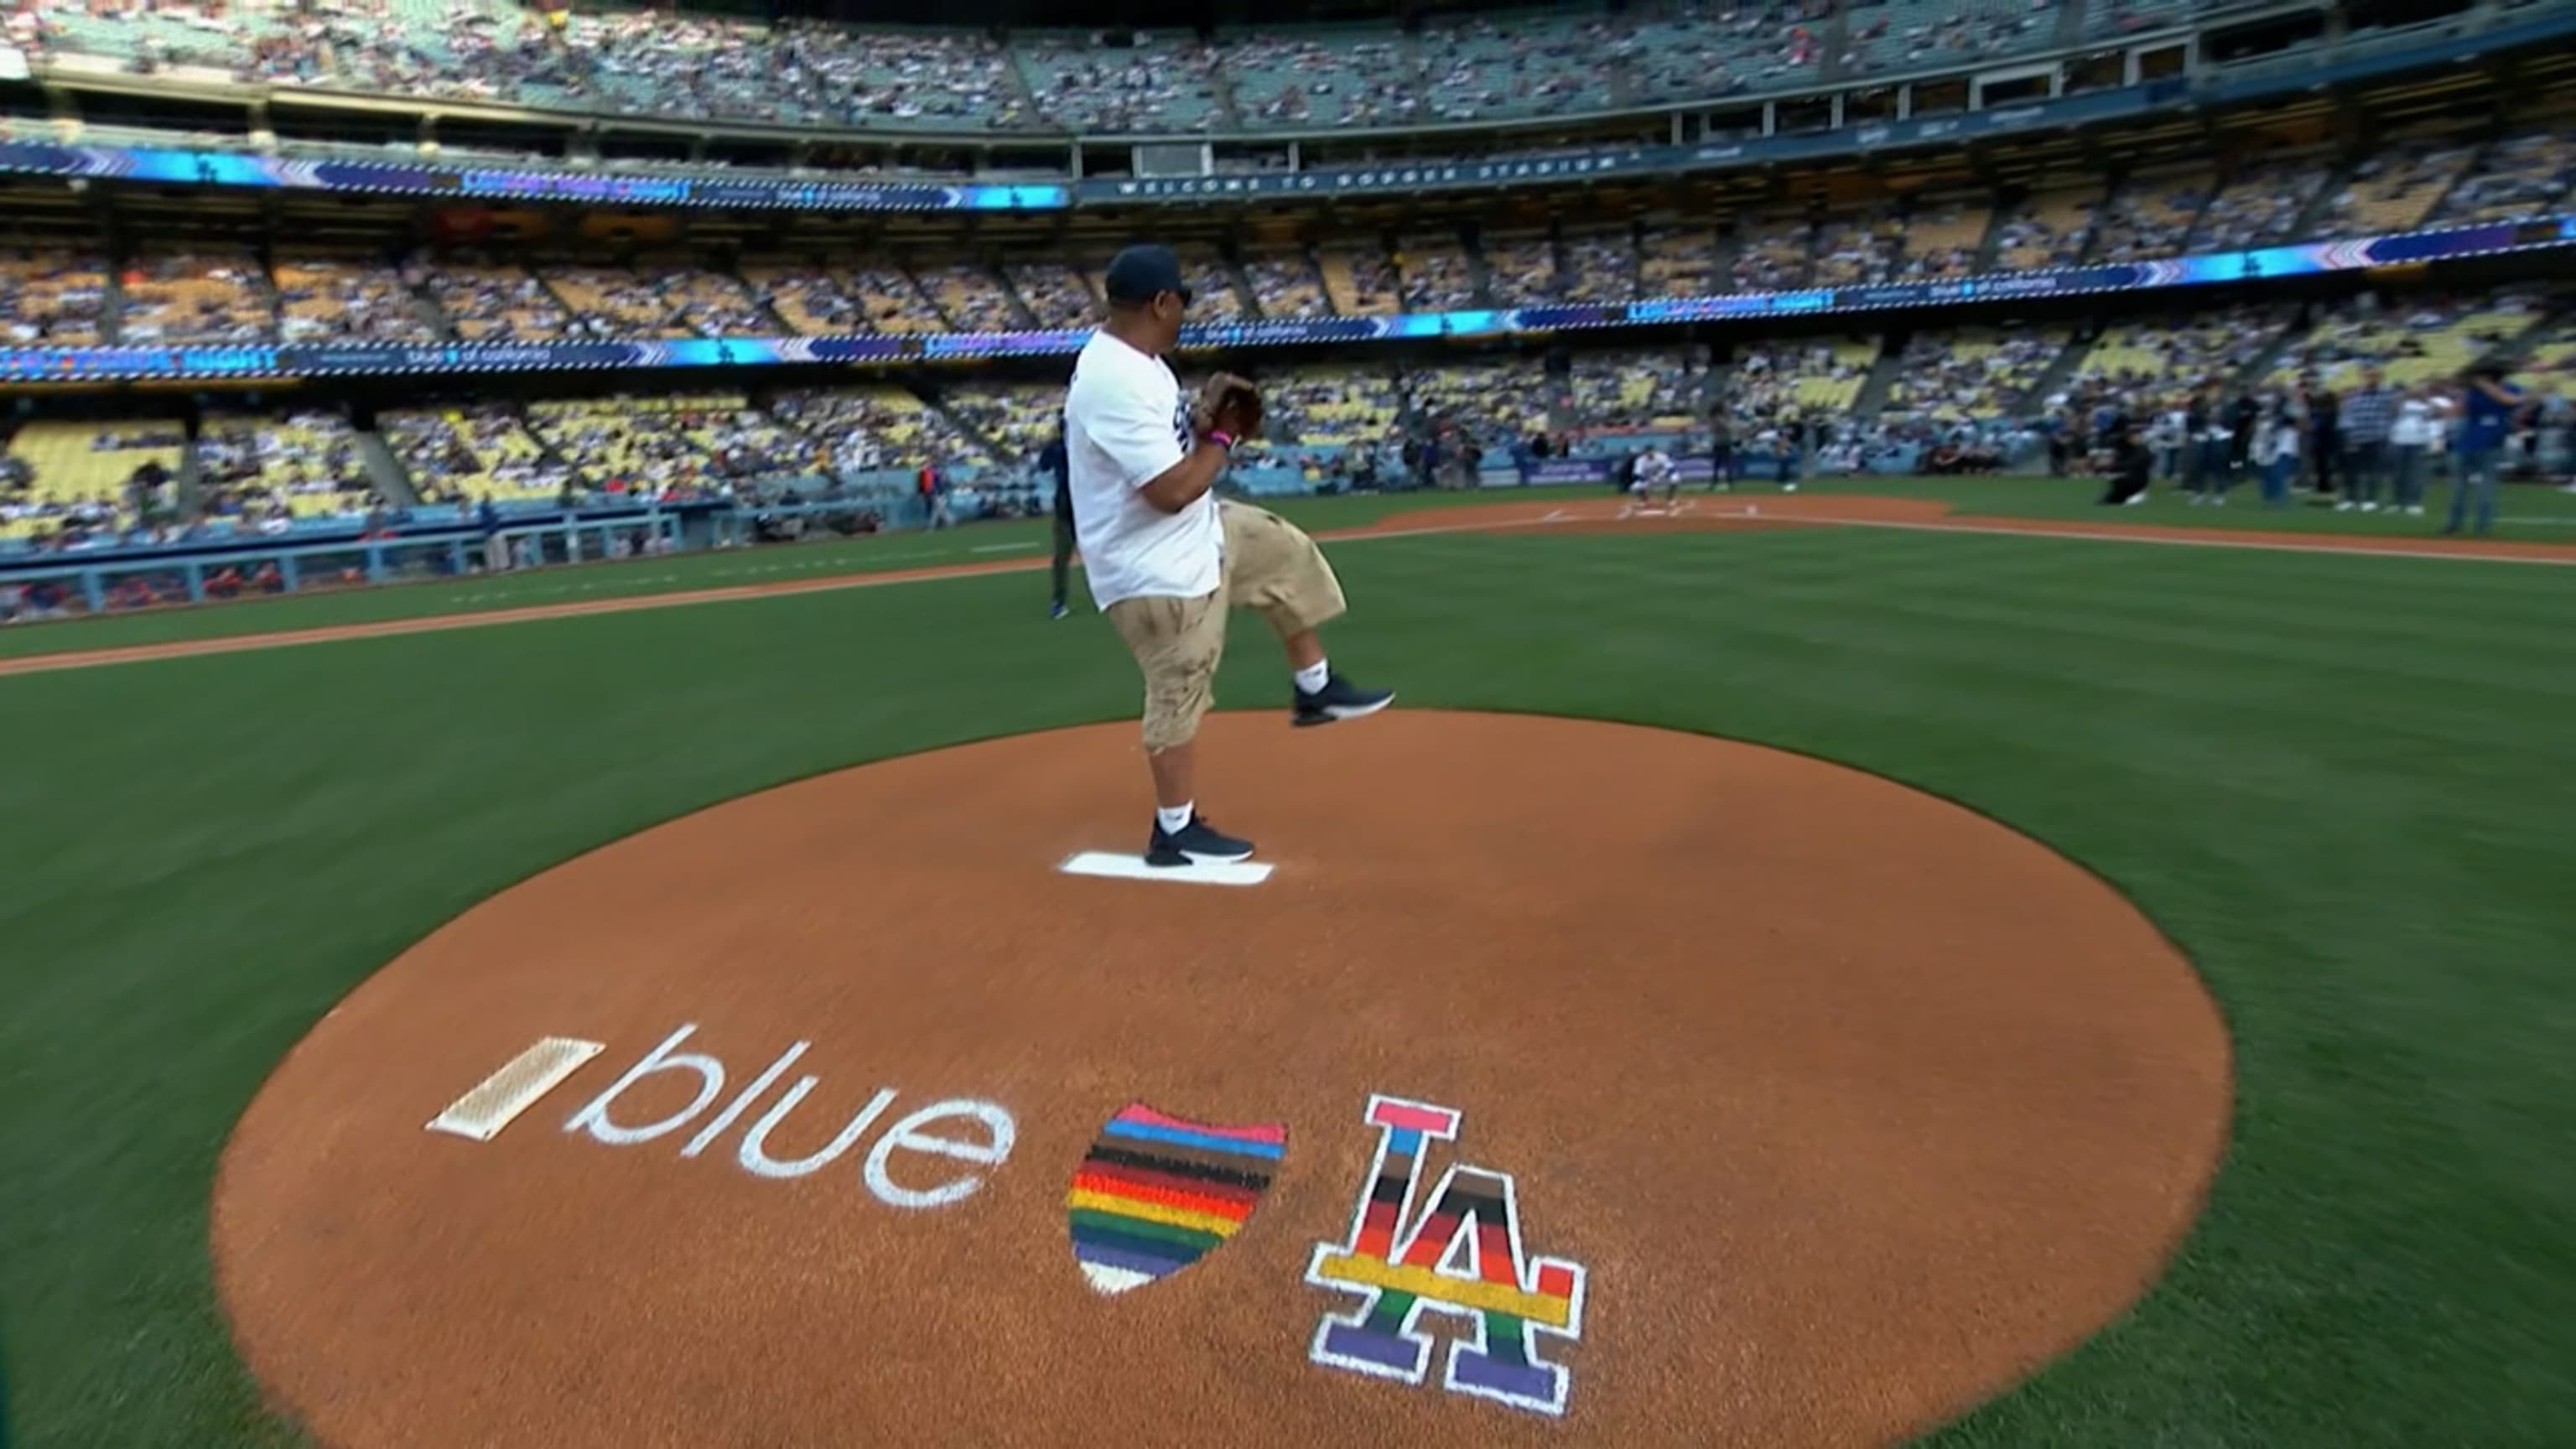 SF Giants To Wear Pride Colors On Jersey, Hats, 'Proud To Stand With LGBTQ+  Community